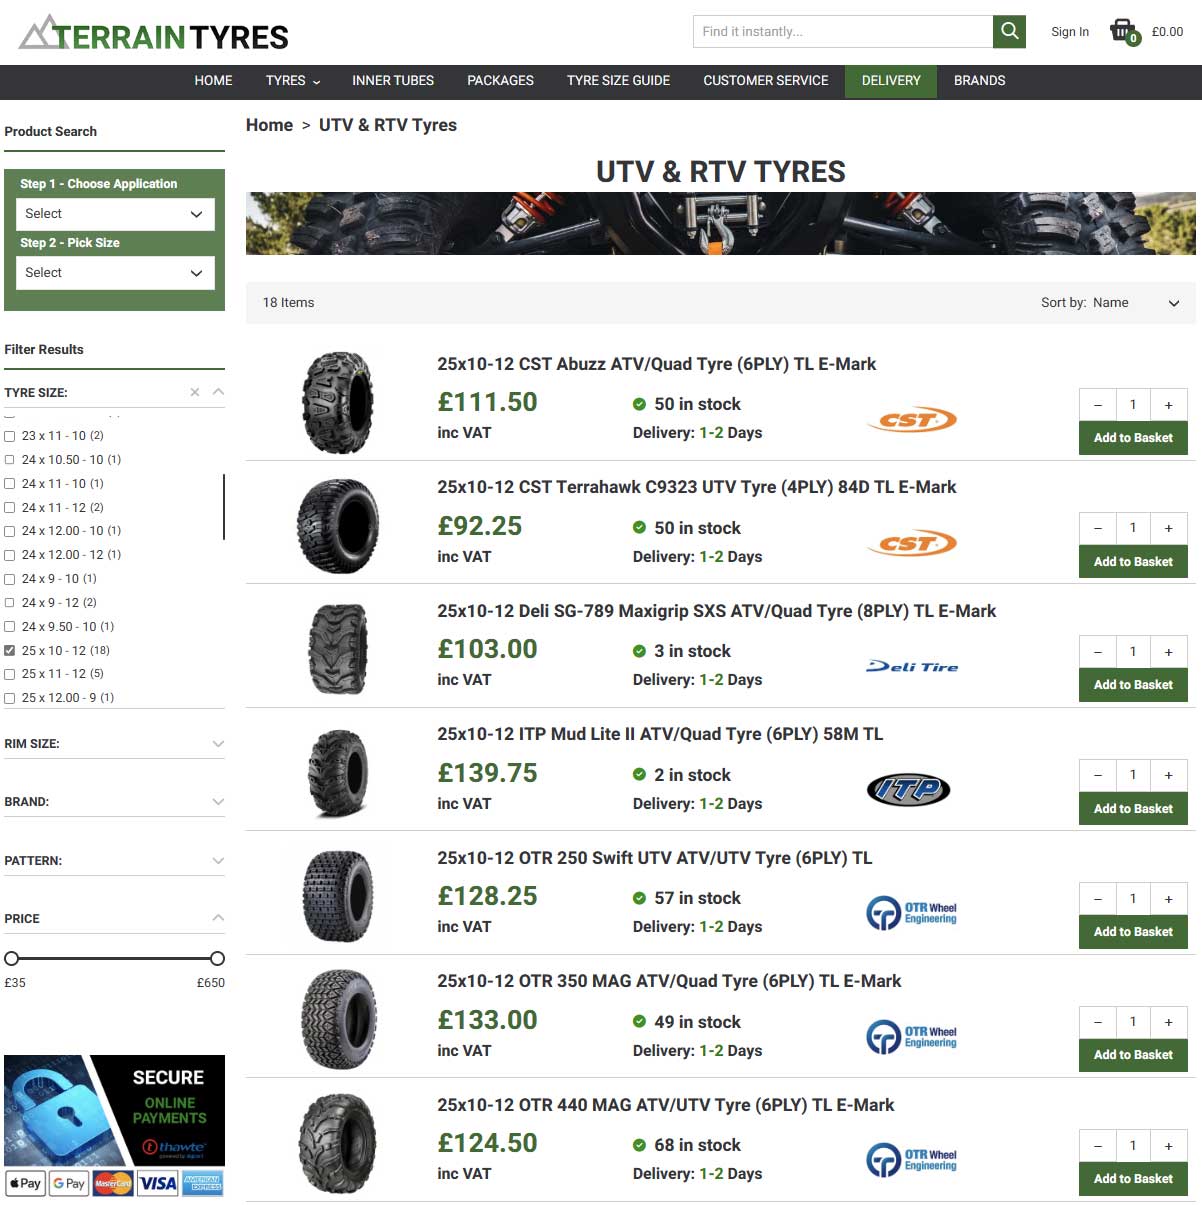 Search by Type Results-Terrain Tyres